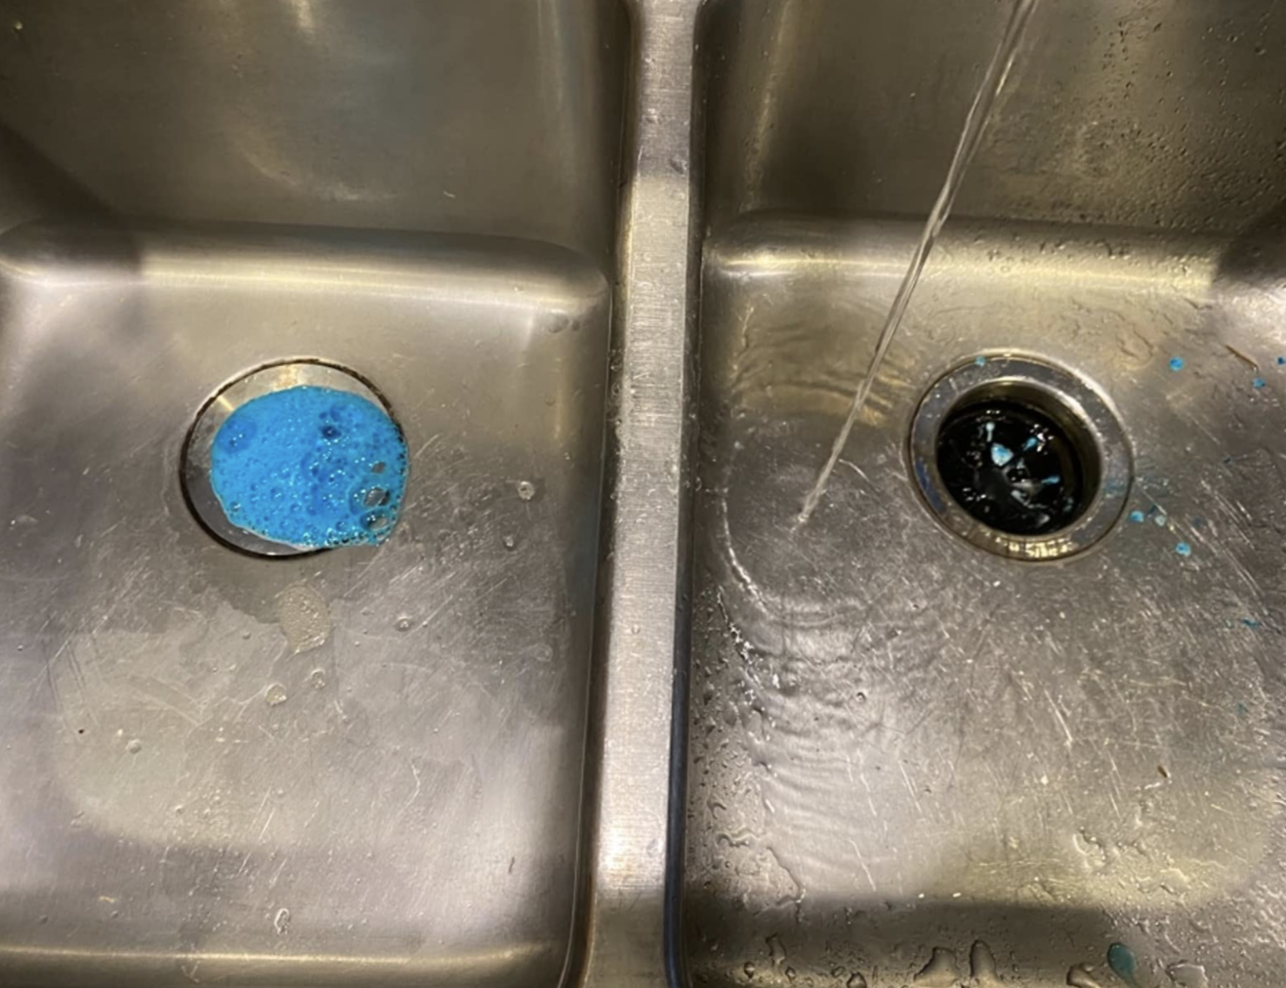 reviewer photo of foaming cleaner in garbage disposal on the left and cleaned garbage disposal on the right